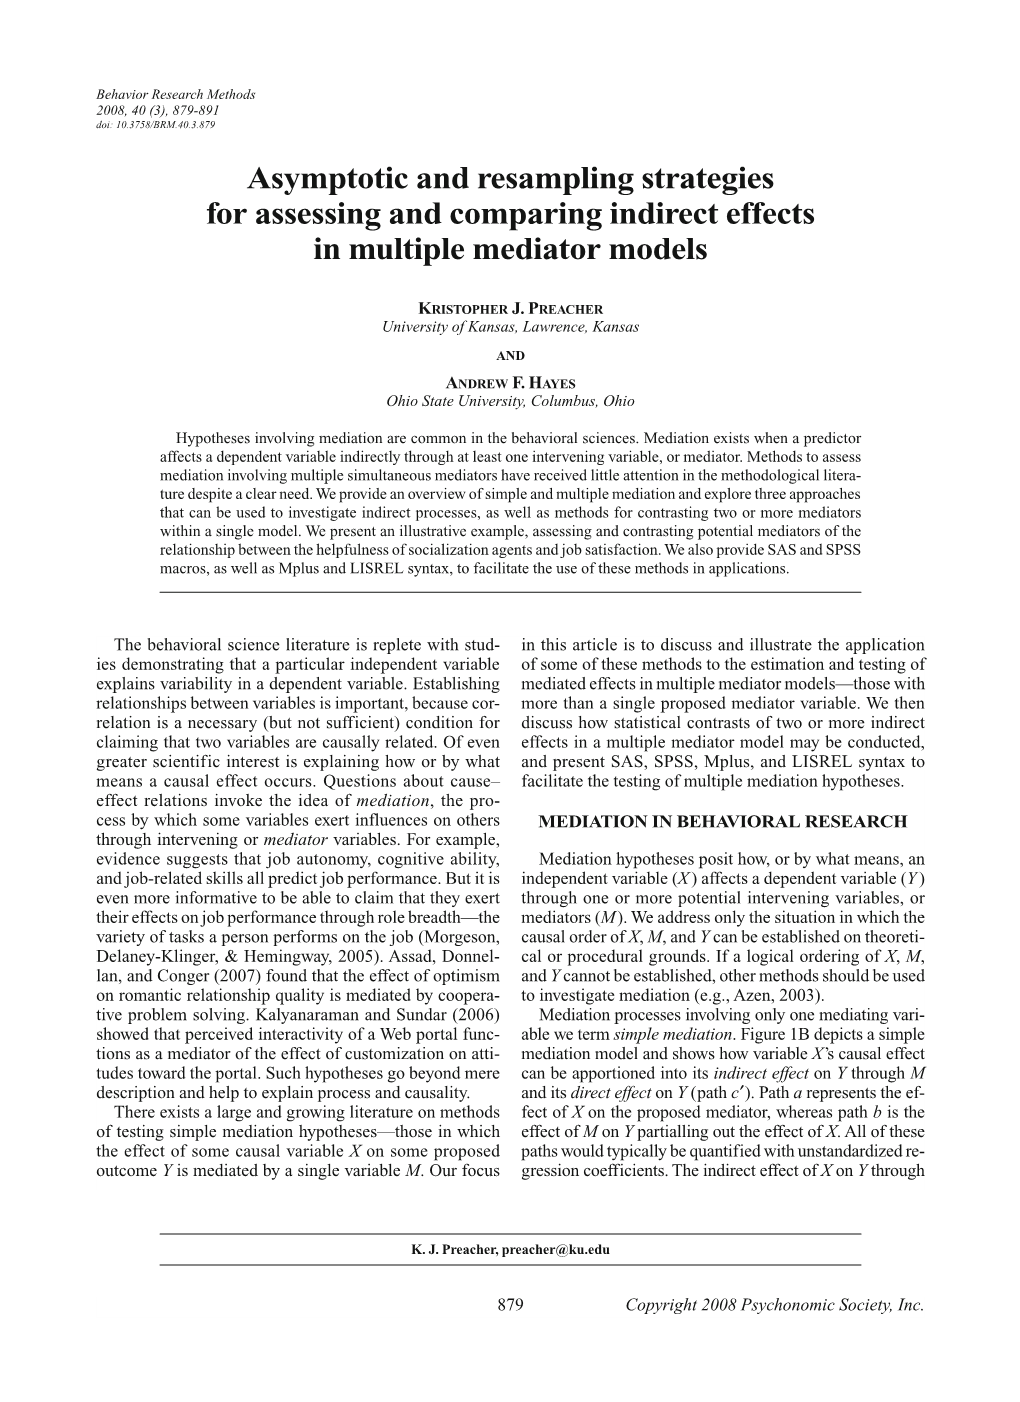 Asymptotic and Resampling Strategies for Assessing and Comparing Indirect Effects in Multiple Mediator Models